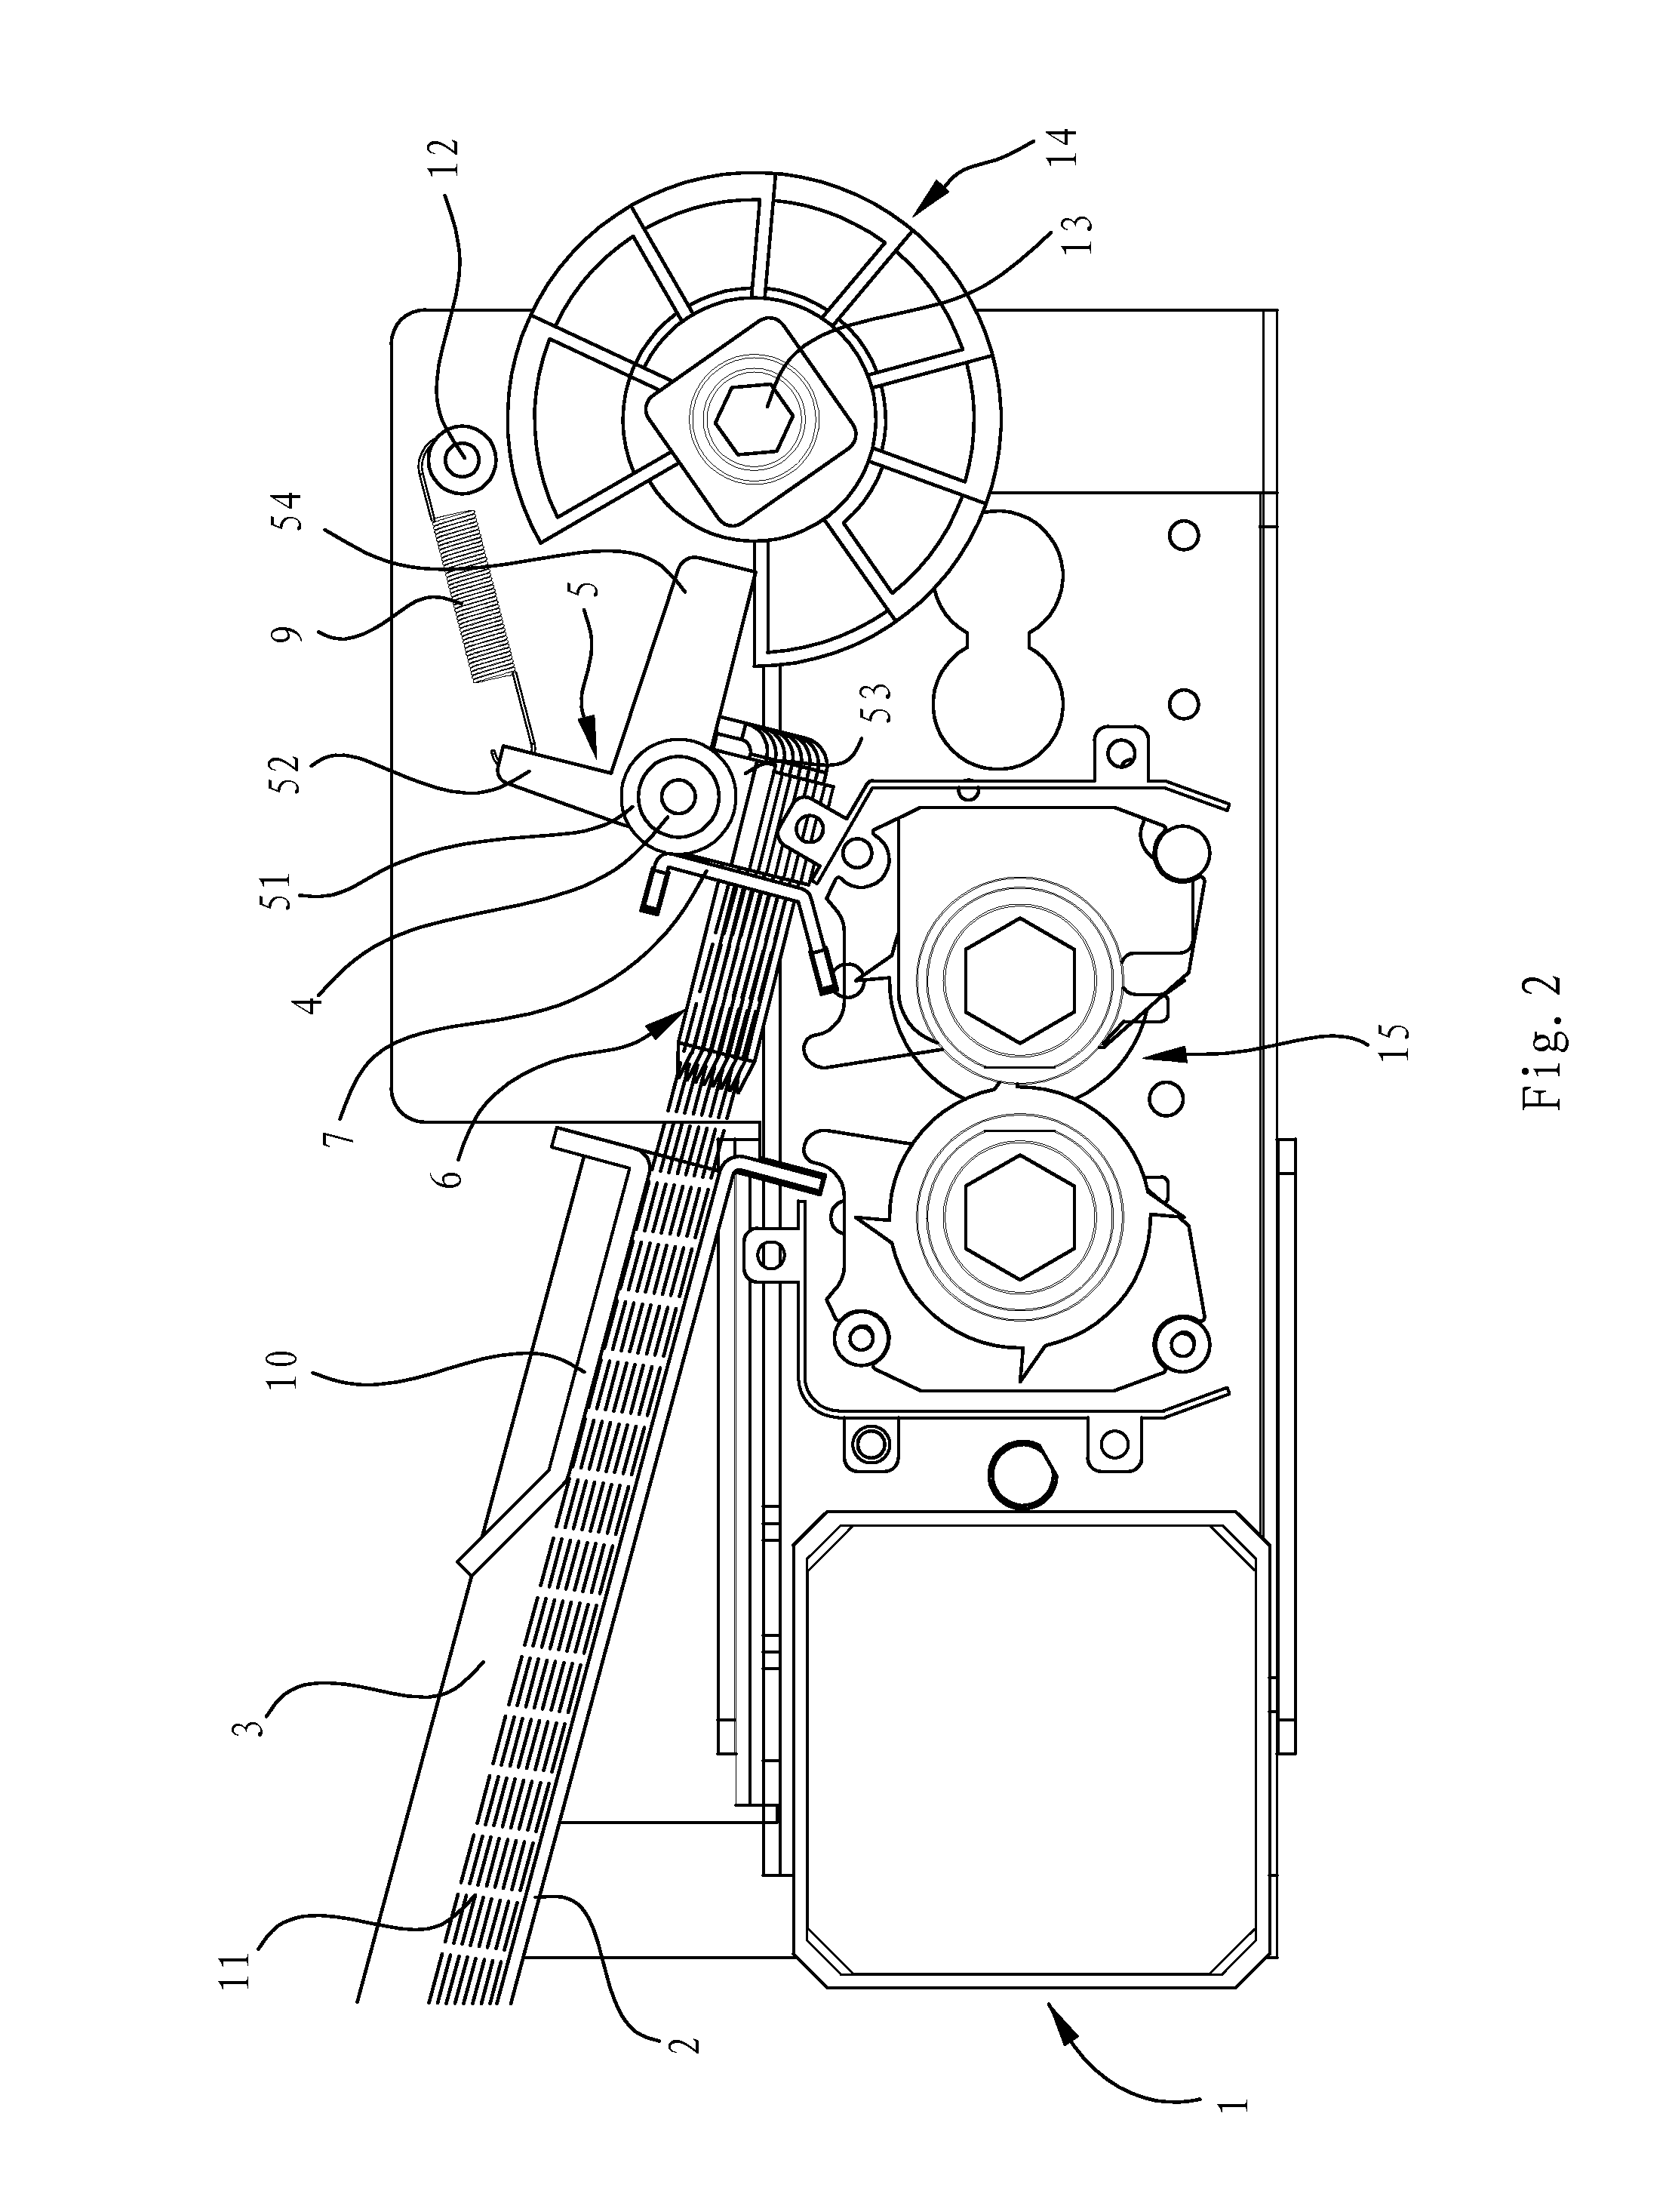 Auto Paper-Combing Mechanism and an Auto Paper-Feeding Mechanism of a Paper Shredder